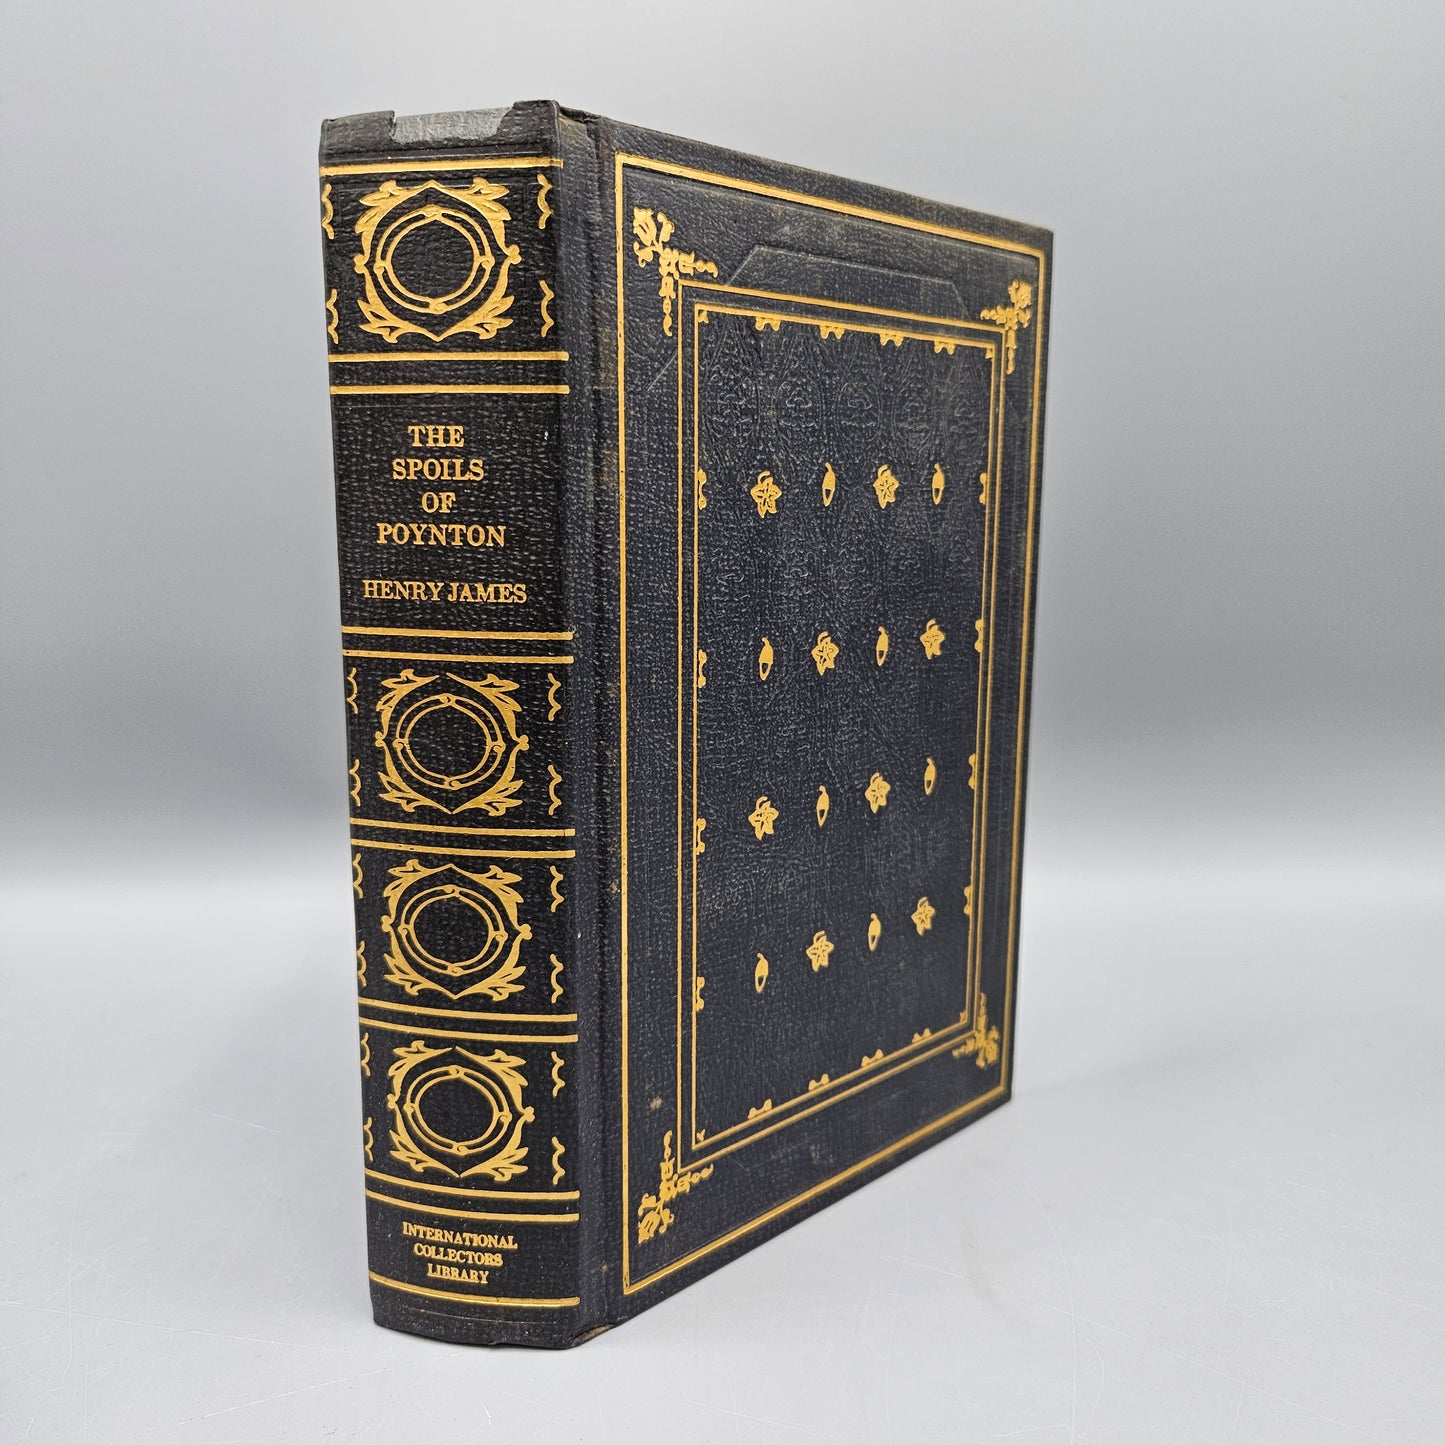 Henry James "The Spoils of Poynton" International Collectors Library